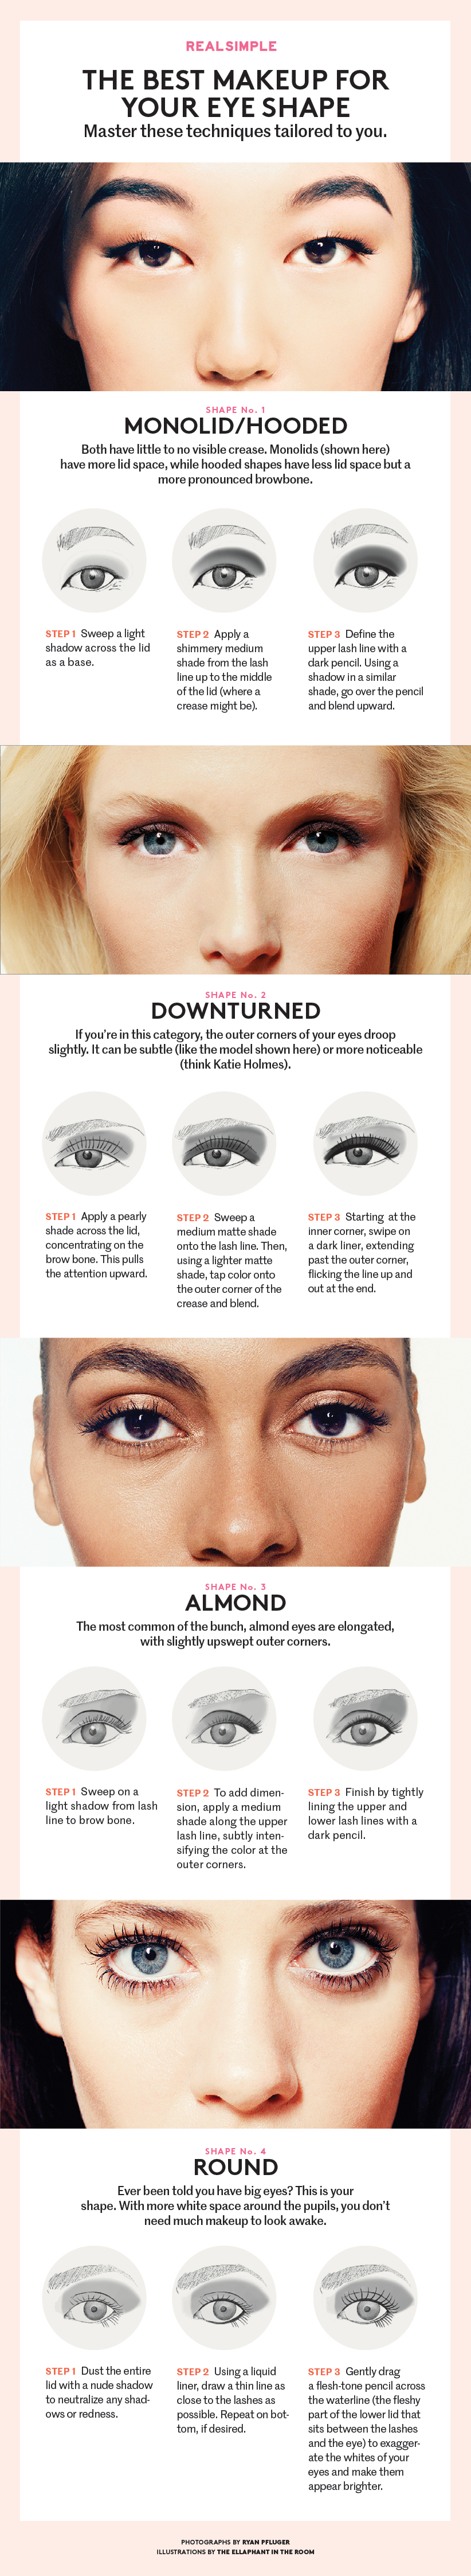 Eye Makeup For Round Eyes Heres The Best Eye Makeup For Your Eye Shape Real Simple